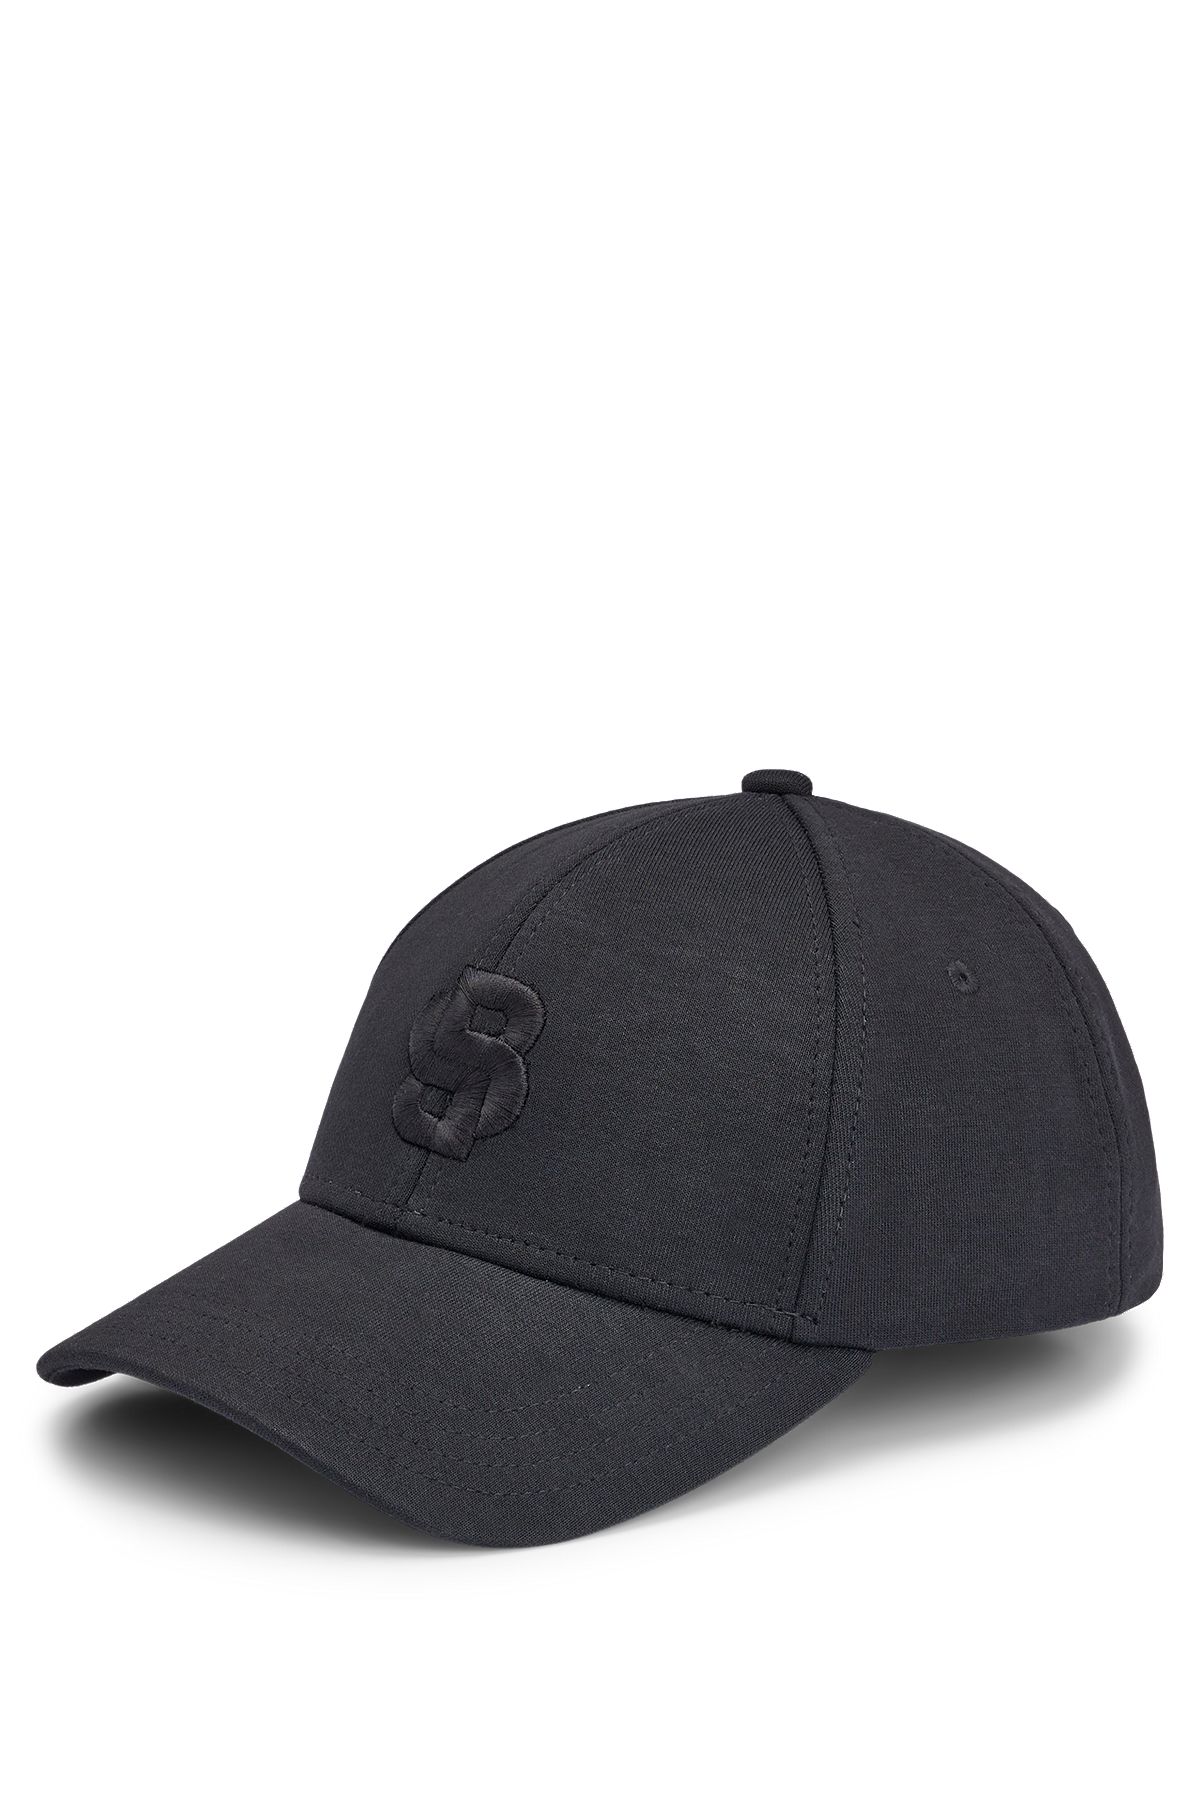 Cotton-blend cap with embroidered double monogram, Black